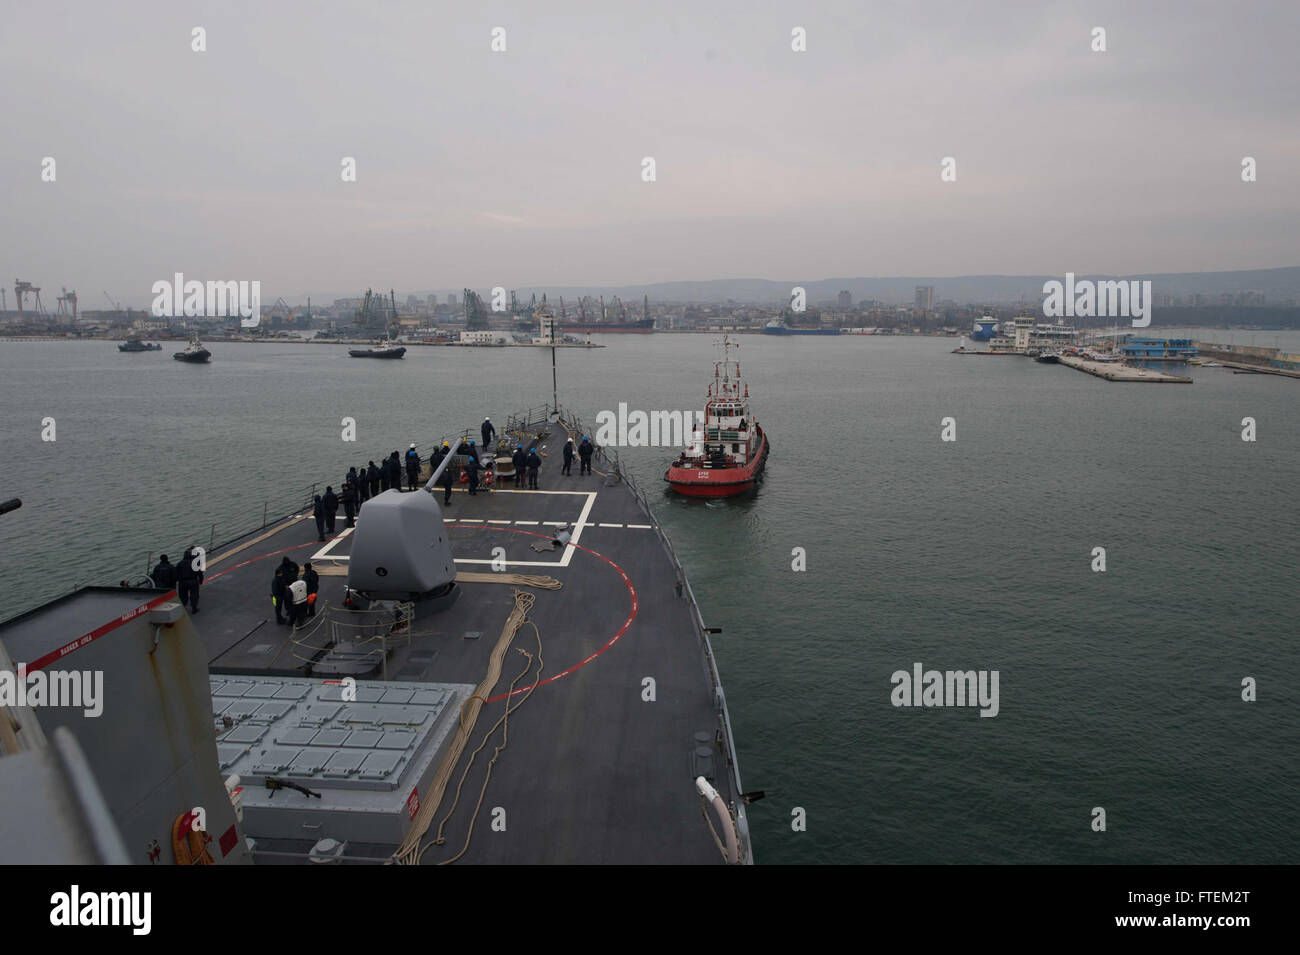 BLACK SEA (Feb. 20, 2015) – A tugboat pulls USS Cole (DDG 67) into Varna, Bulgaria, for a scheduled refueling, Feb. 20, 2015. Cole, an Arleigh Burke-class guided-missile destroyer, homeported in Norfolk, is conducting naval operations in the U.S. 6th Fleet area of operations in support of U.S. national security interests in Europe. Stock Photo